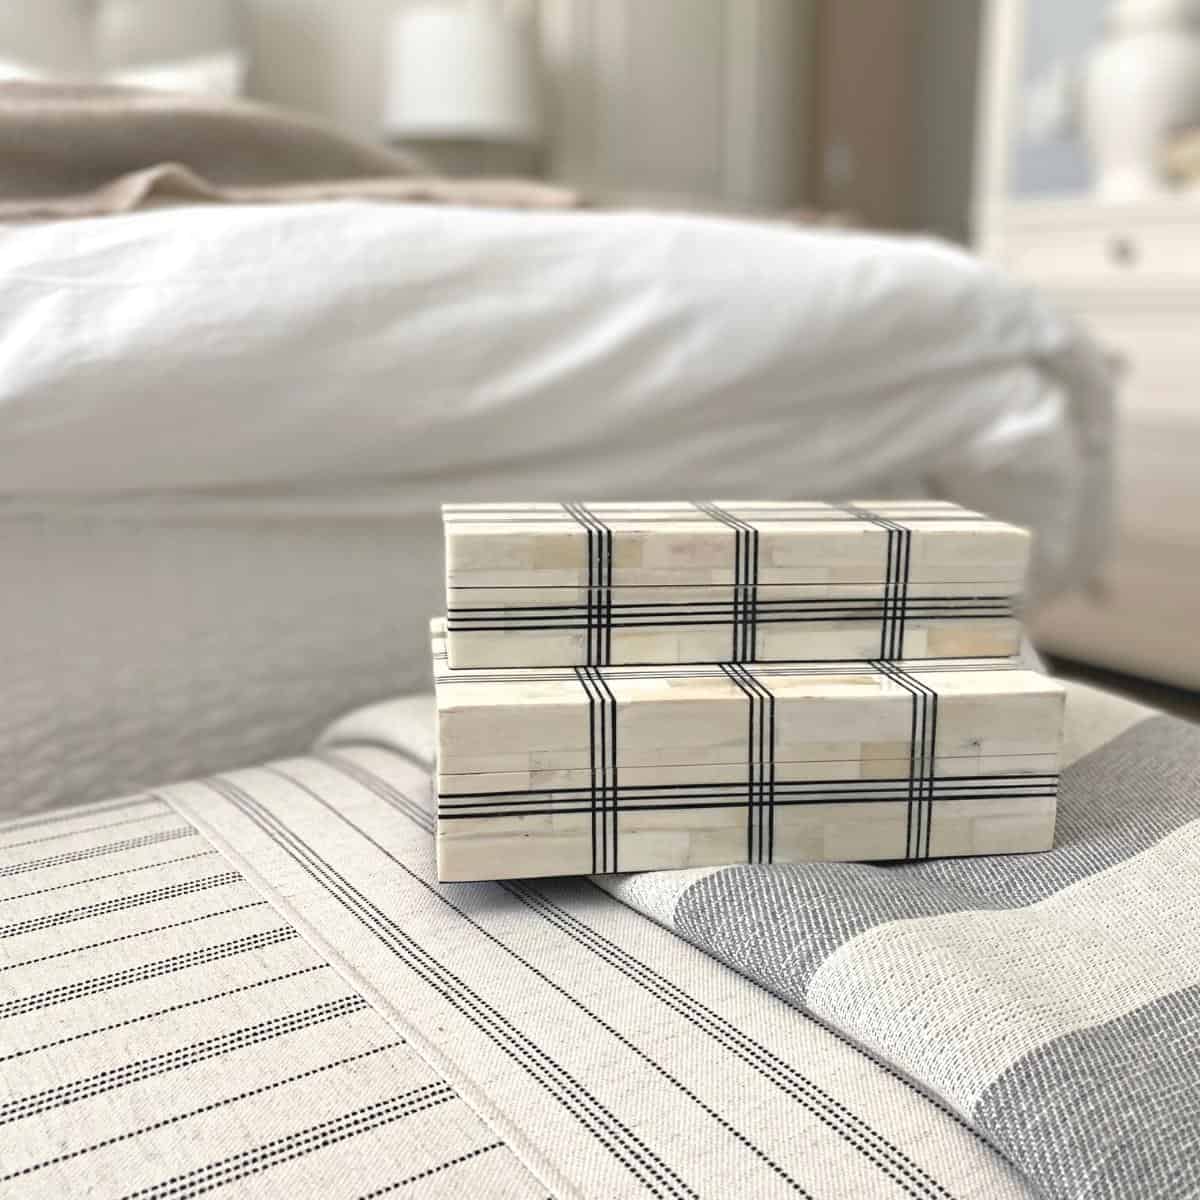 Wide grid bone boxes on top of a striped ottoman and grey-blue throw blanket at the foot of a bed